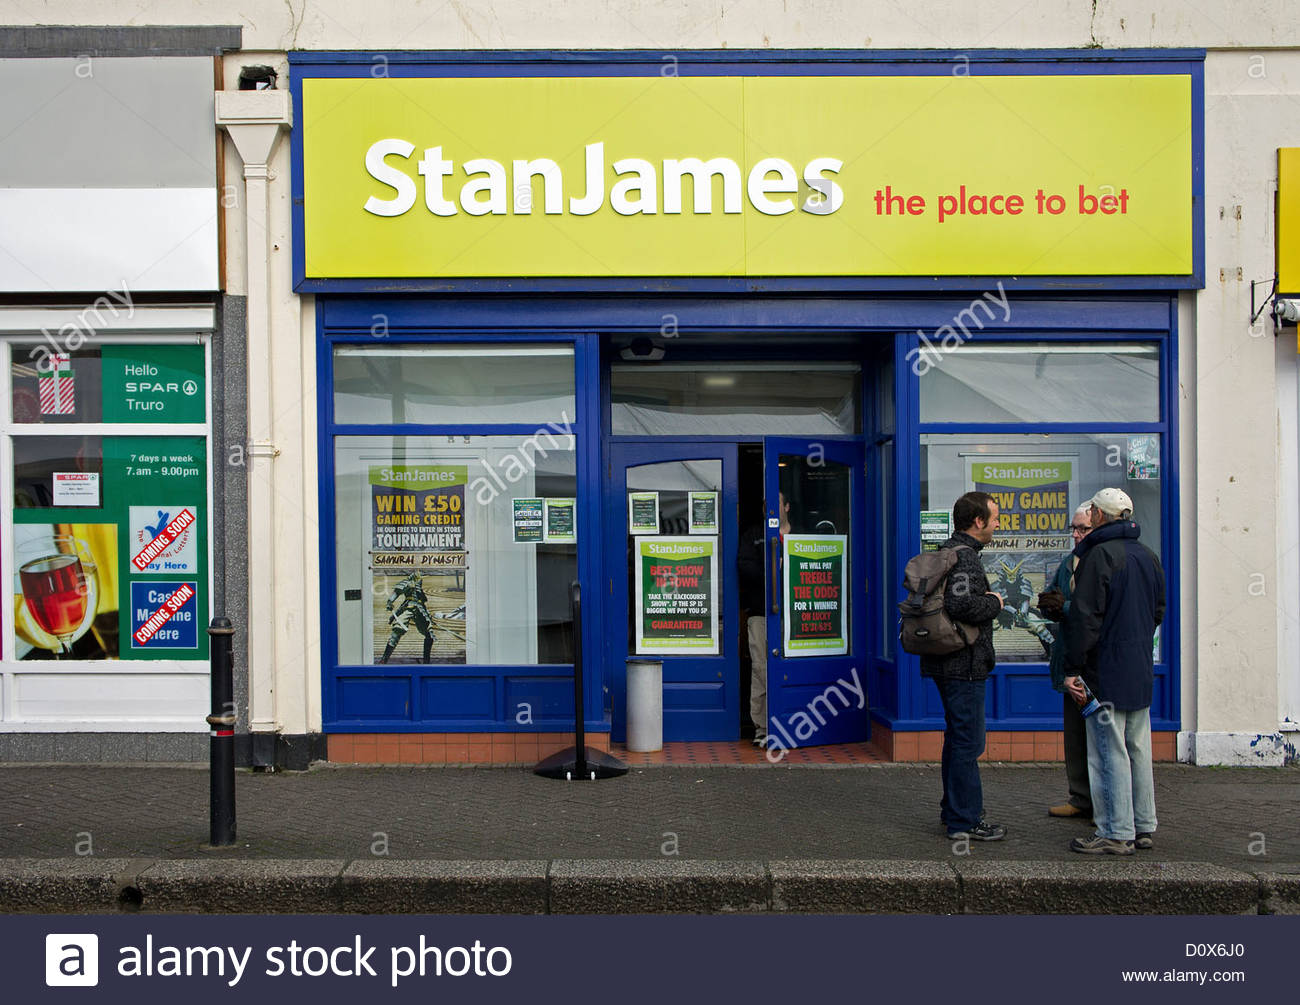 Stan james betting shops in london city